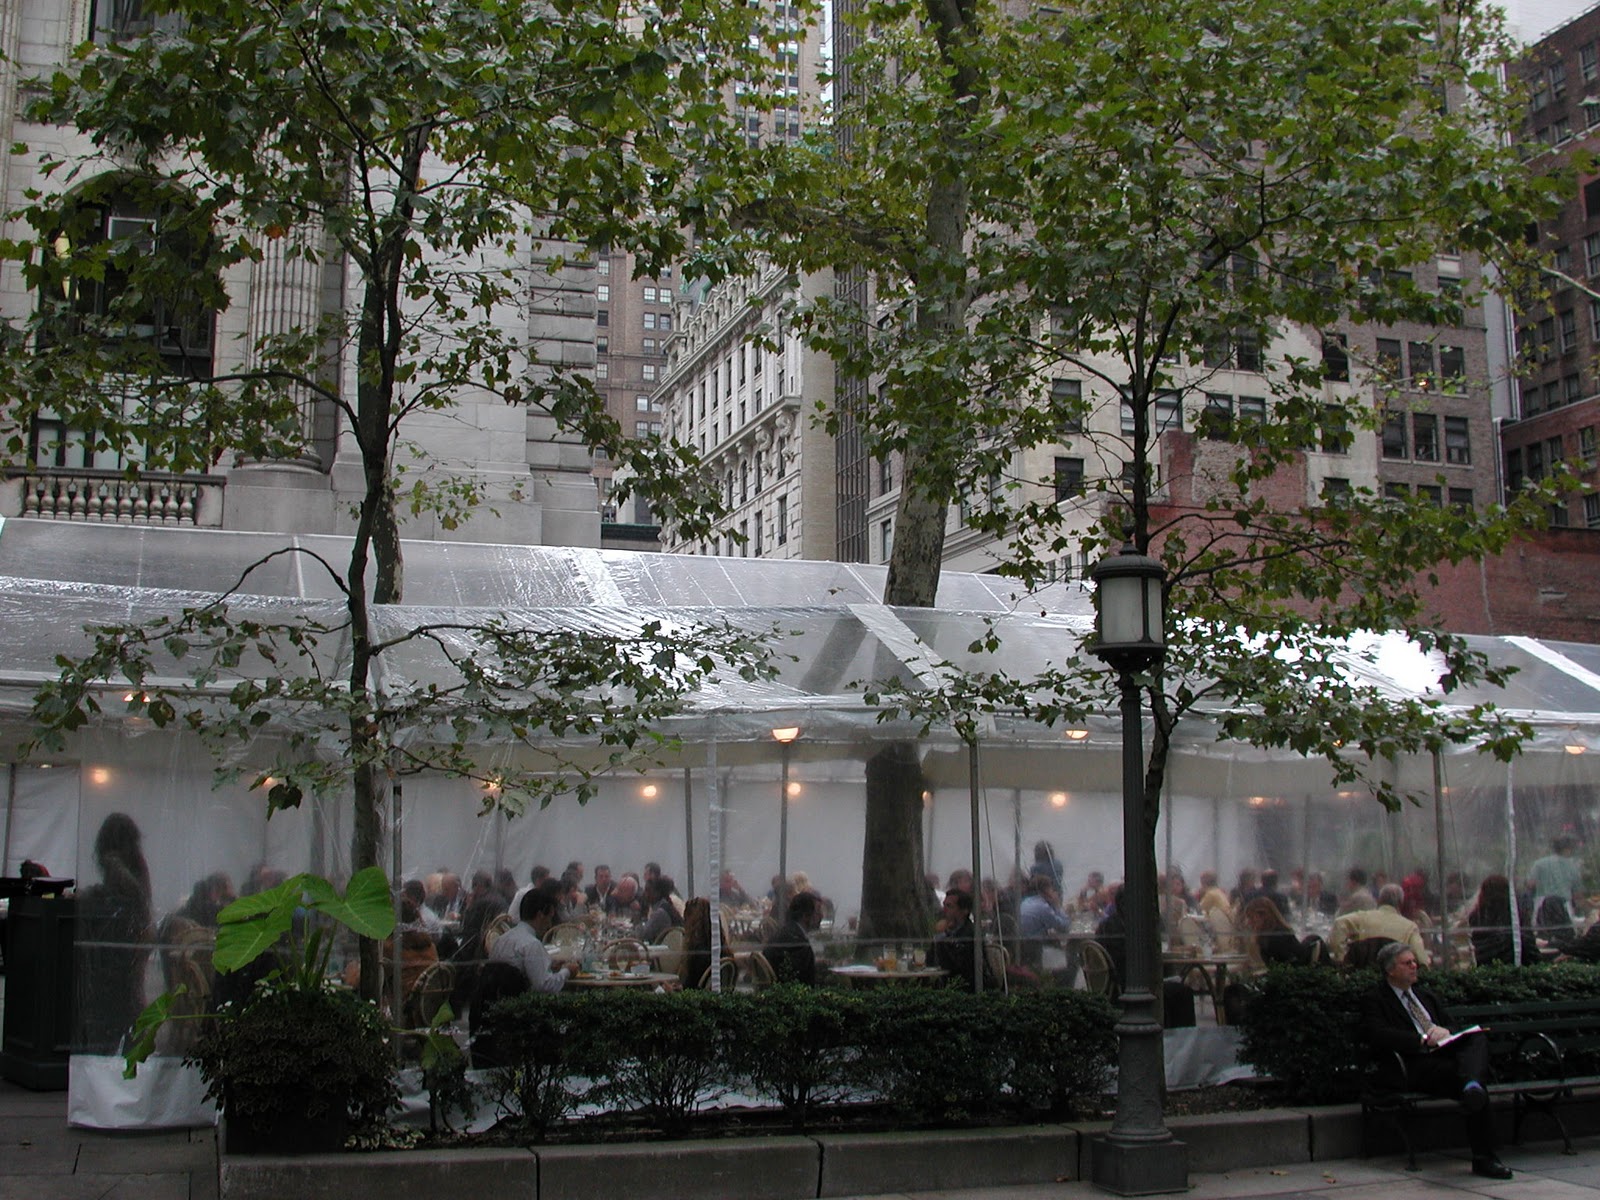 Bryant Park Grill And Cafe Menu